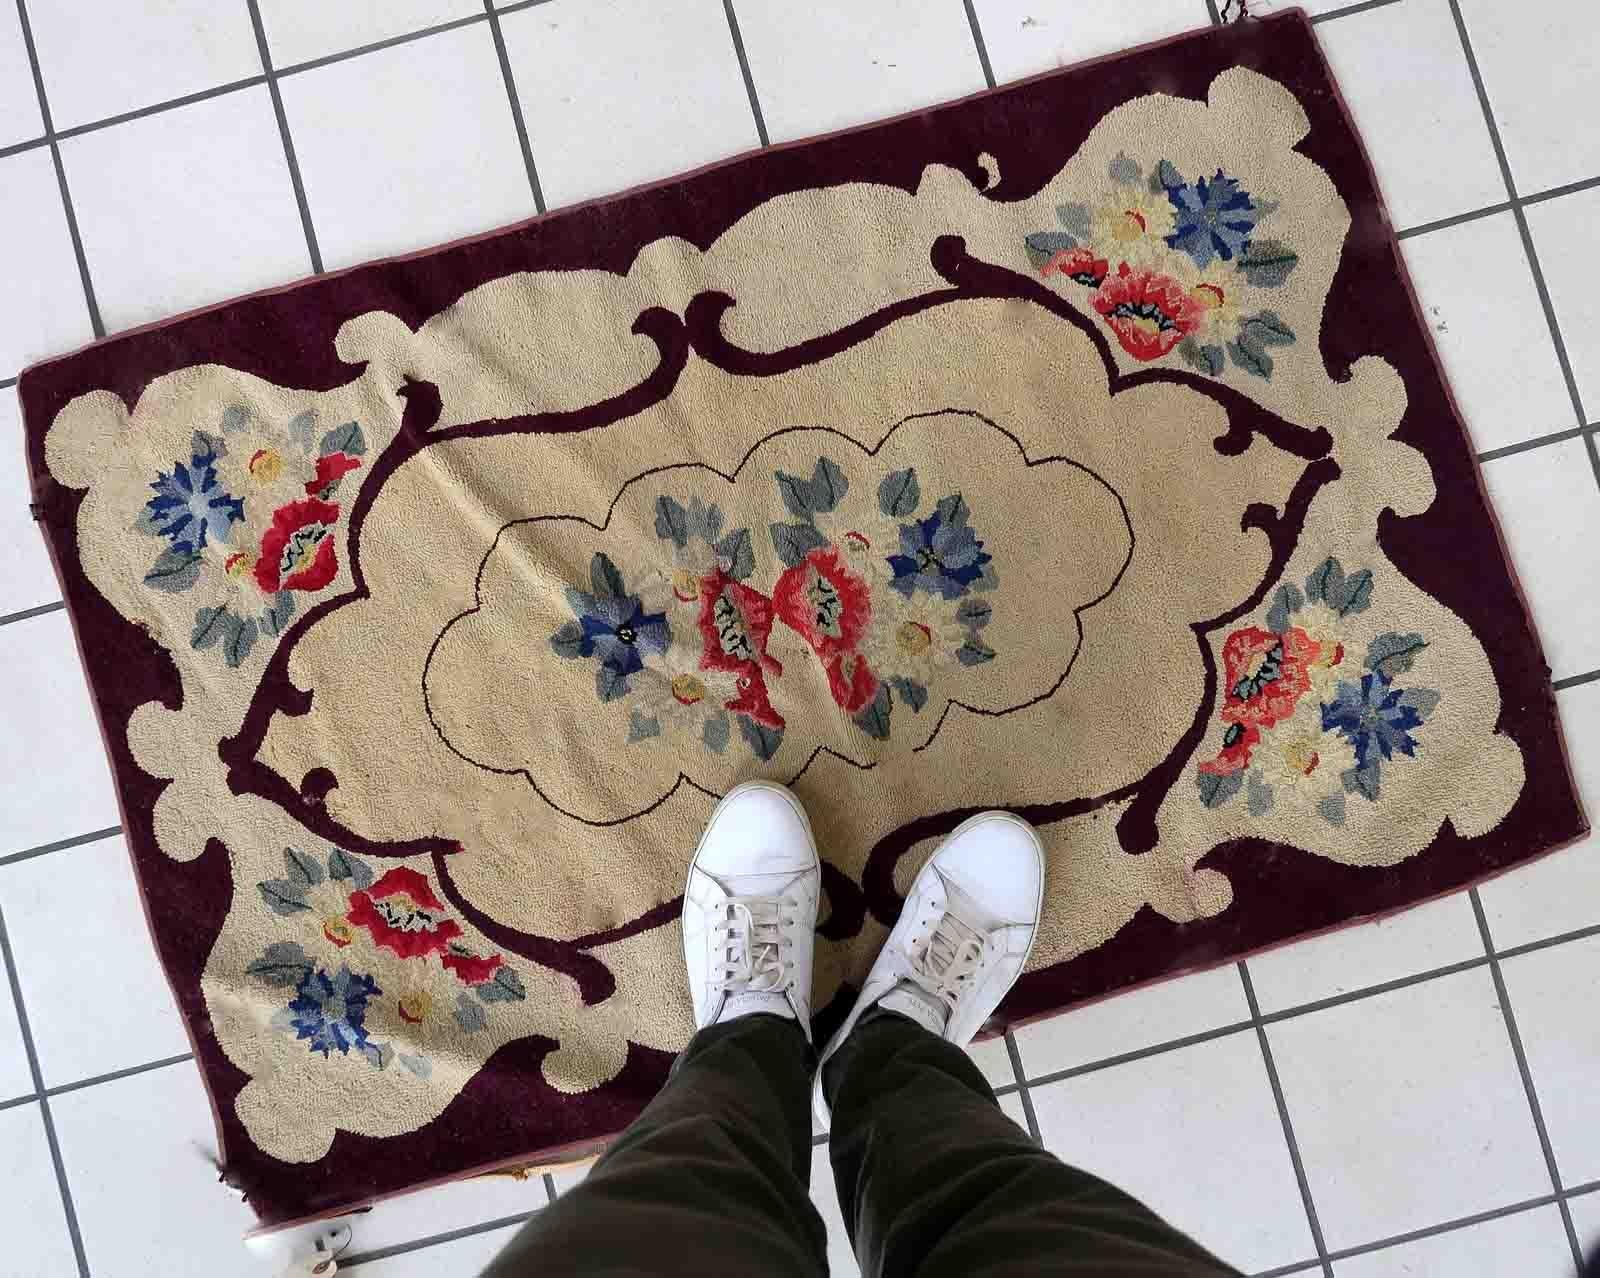 Handmade antique American Hooked rug in floral design. The rug is from the beginning of 20th century in good condition, the rug has old restorations.

-condition: good, restored,

-circa: 1900s,

-size: 2.4' x 3.8' (76cm x